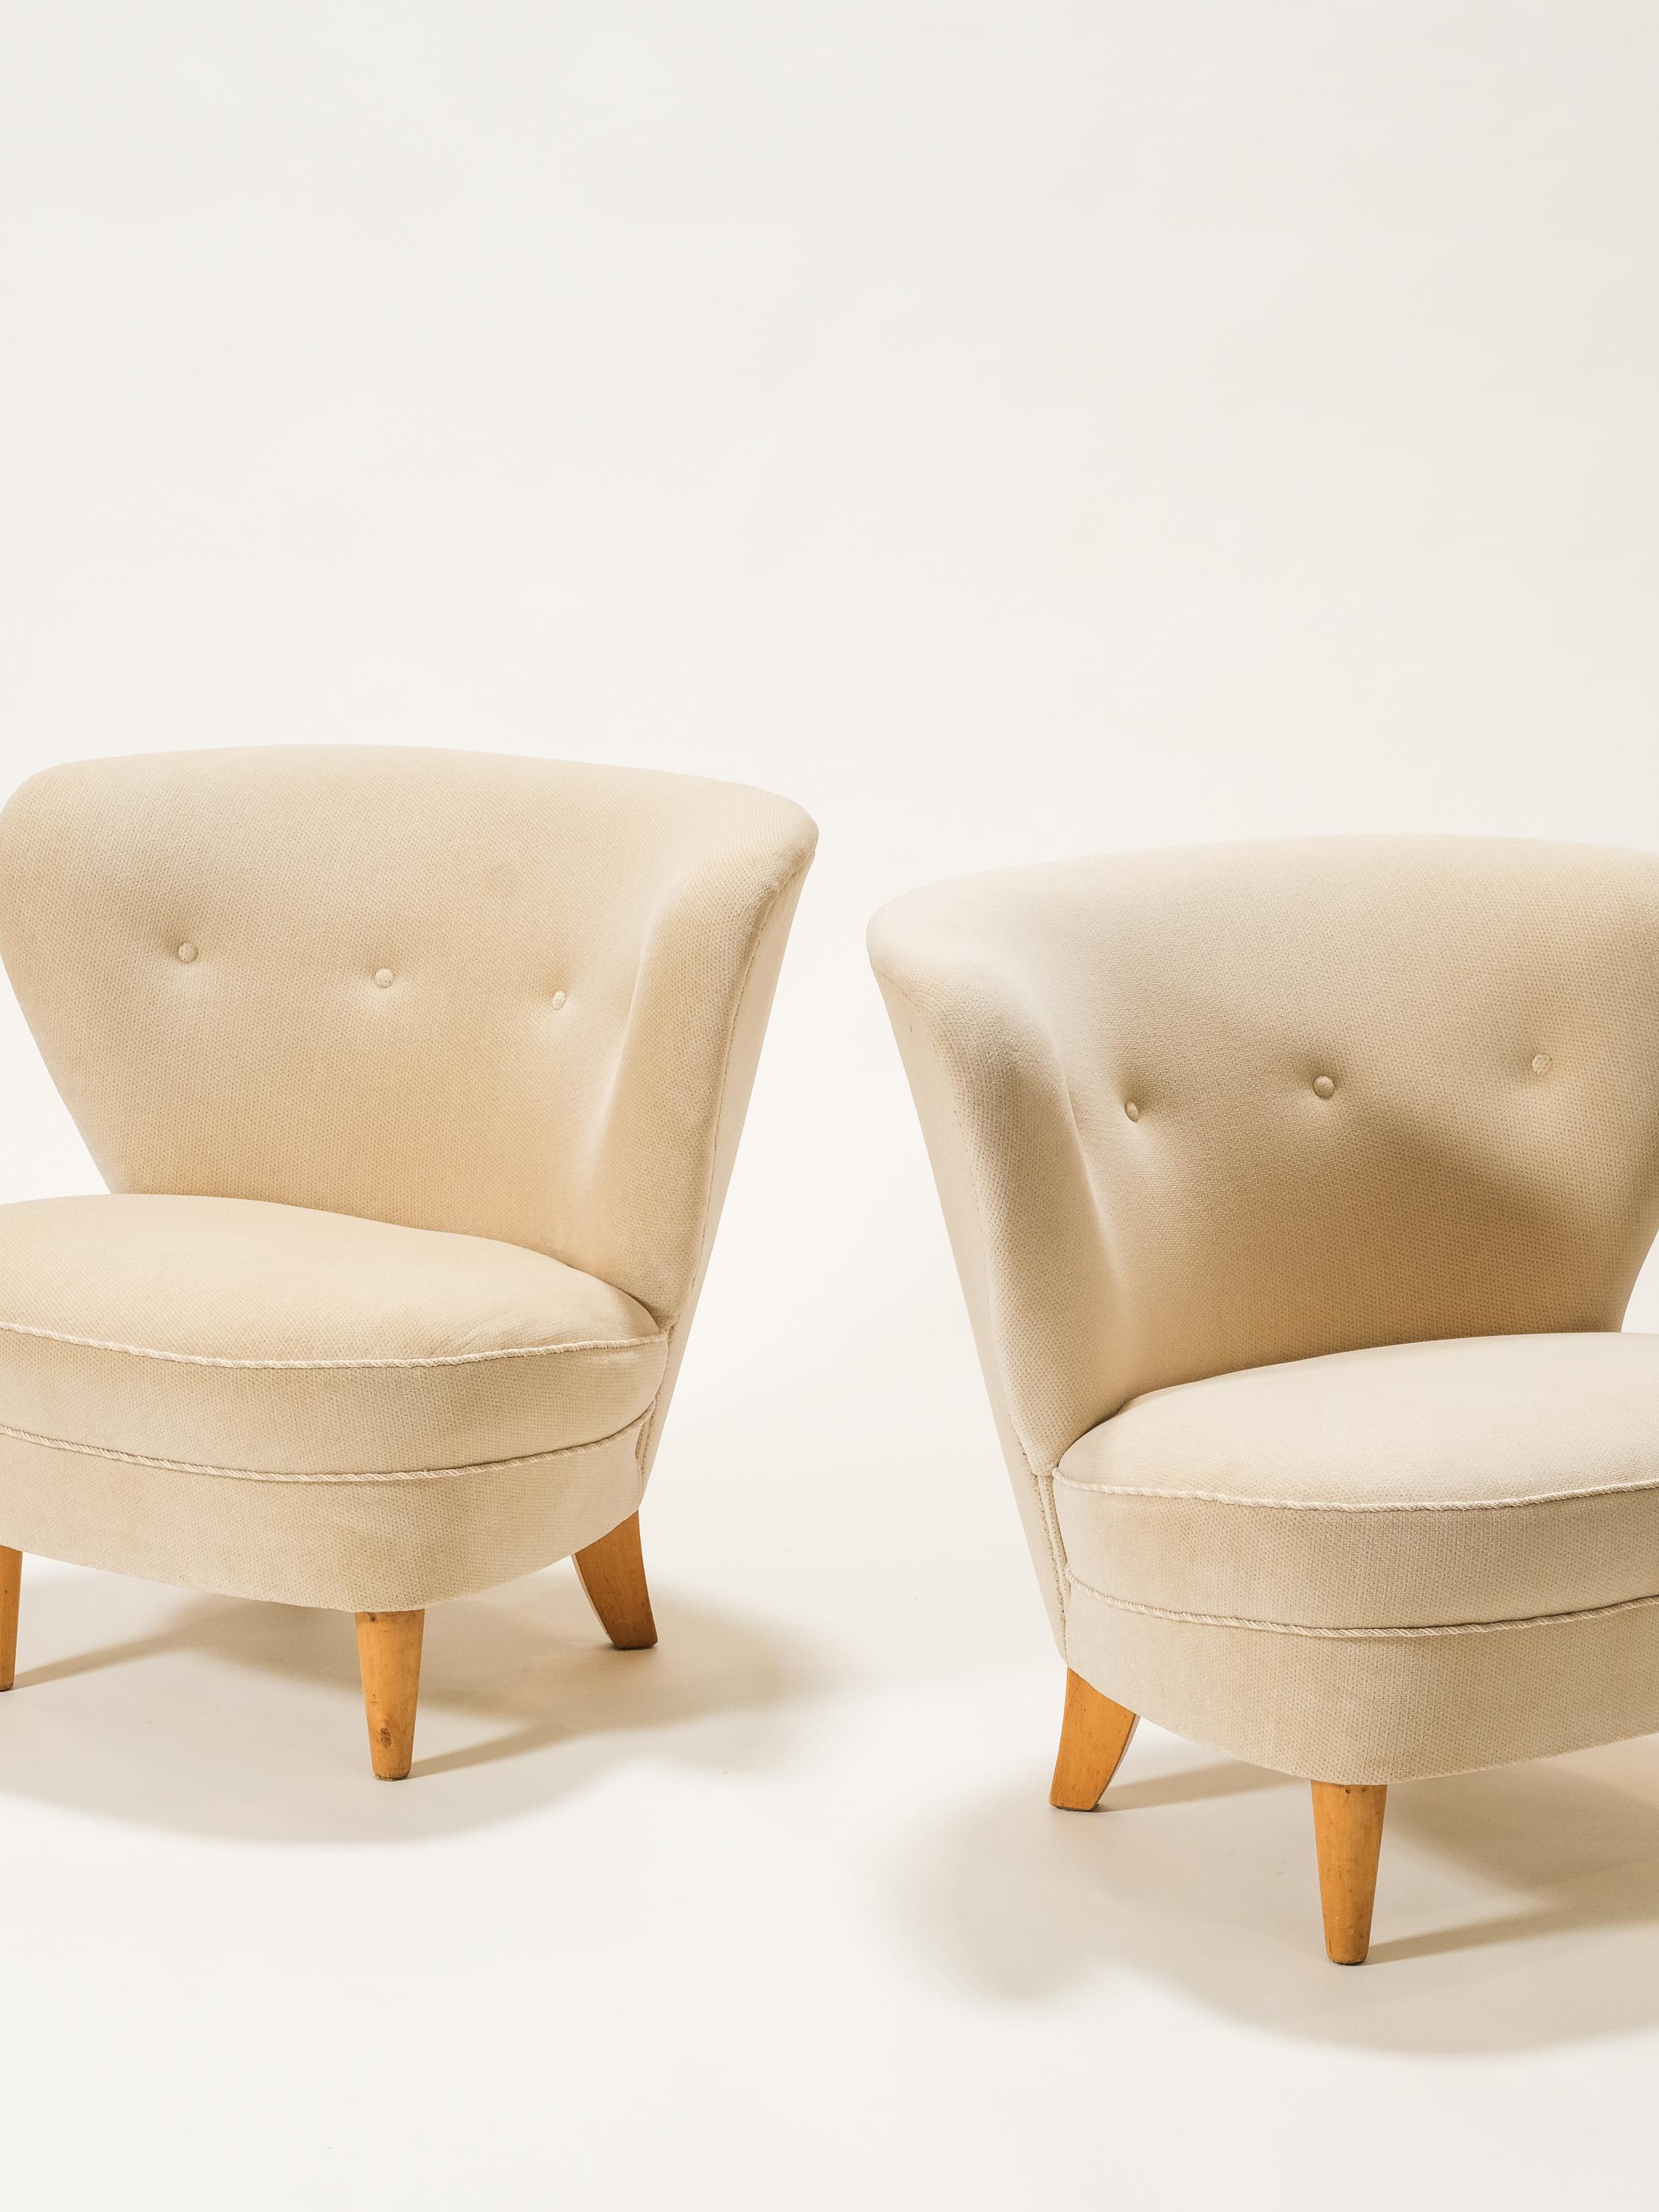 Pair of easy chairs from Finland, 1950s.